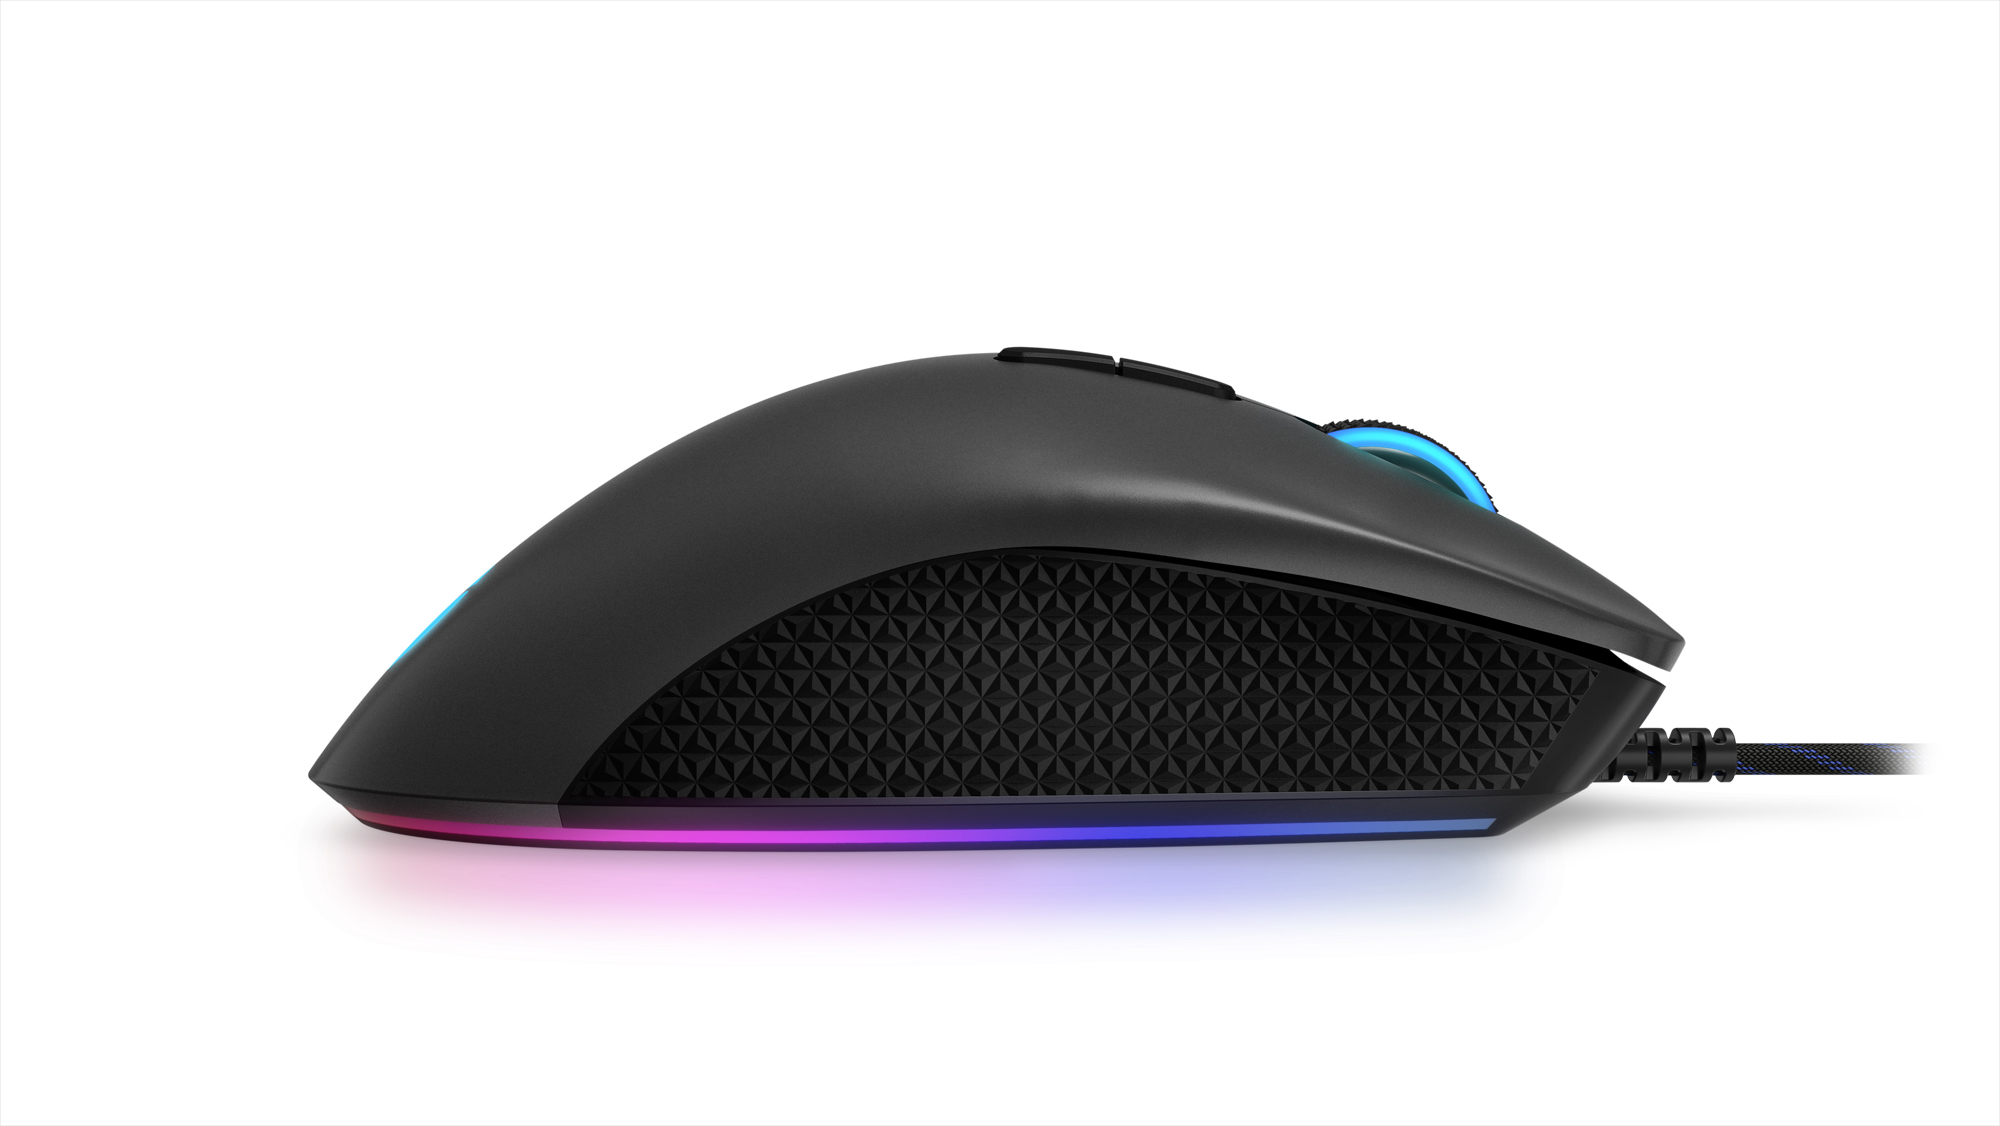 lenovo announce new legion gaming peripherals ces 2019 09 m500 right side